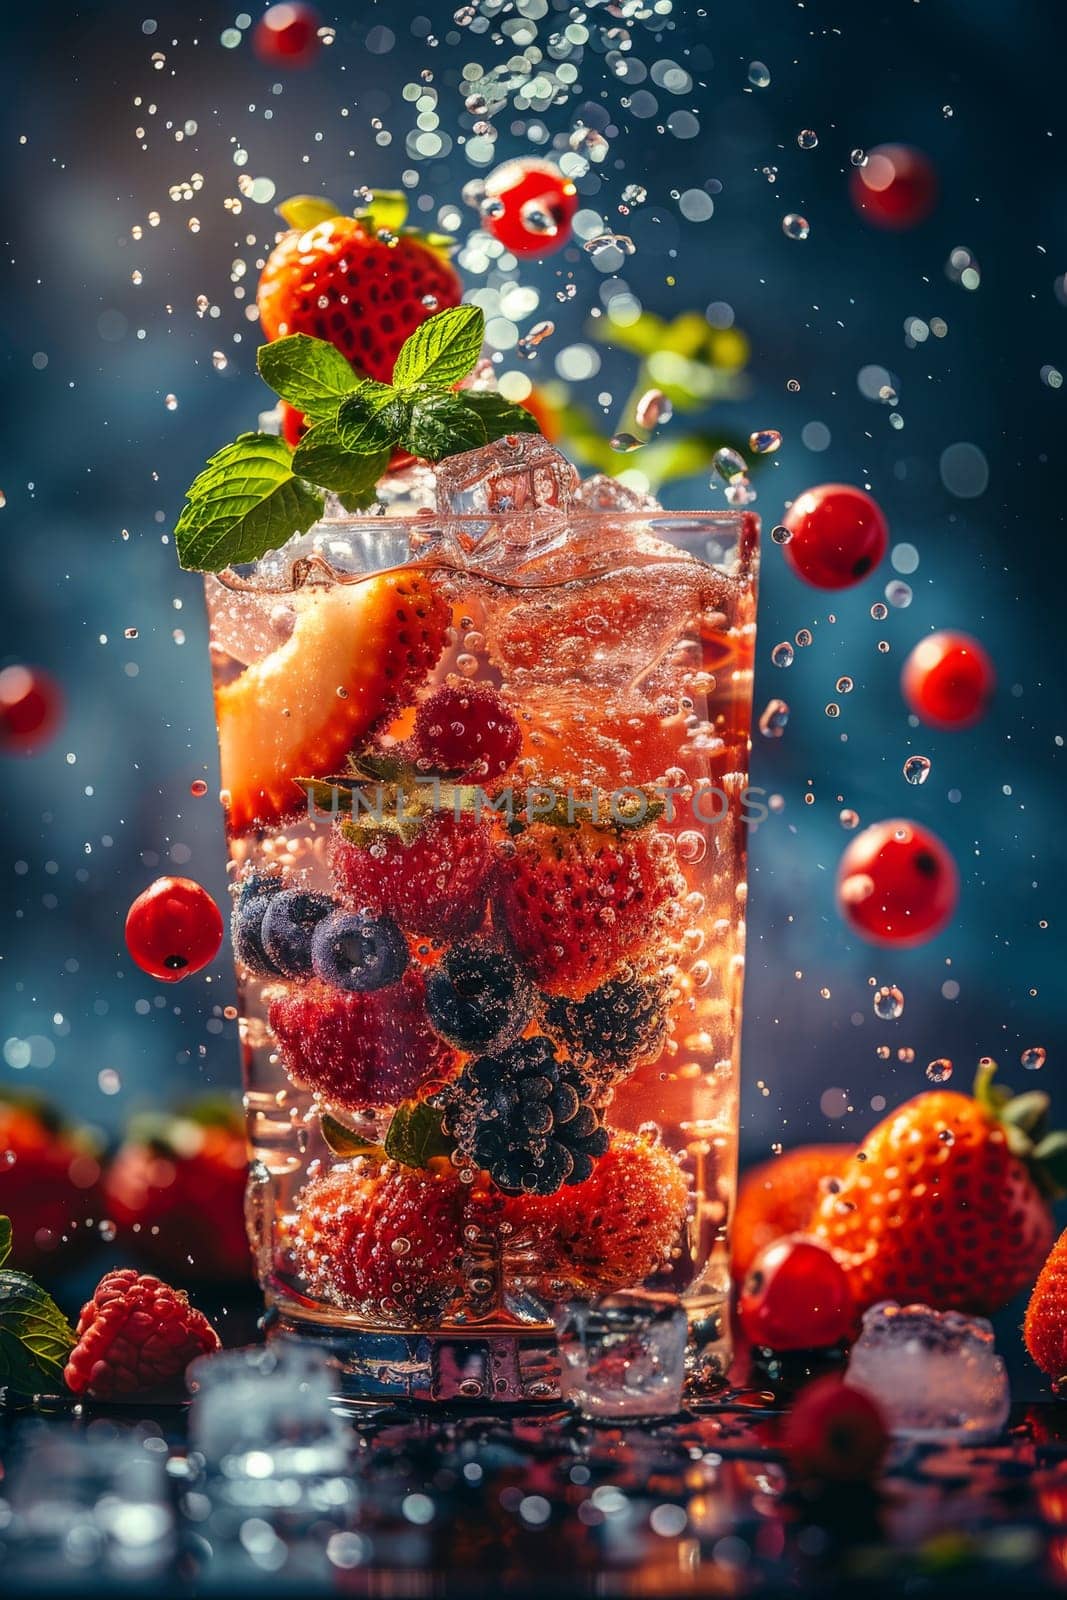 A glass of fruit punch with ice and berries. The drink is full of fruit and ice, and the berries are floating in the drink